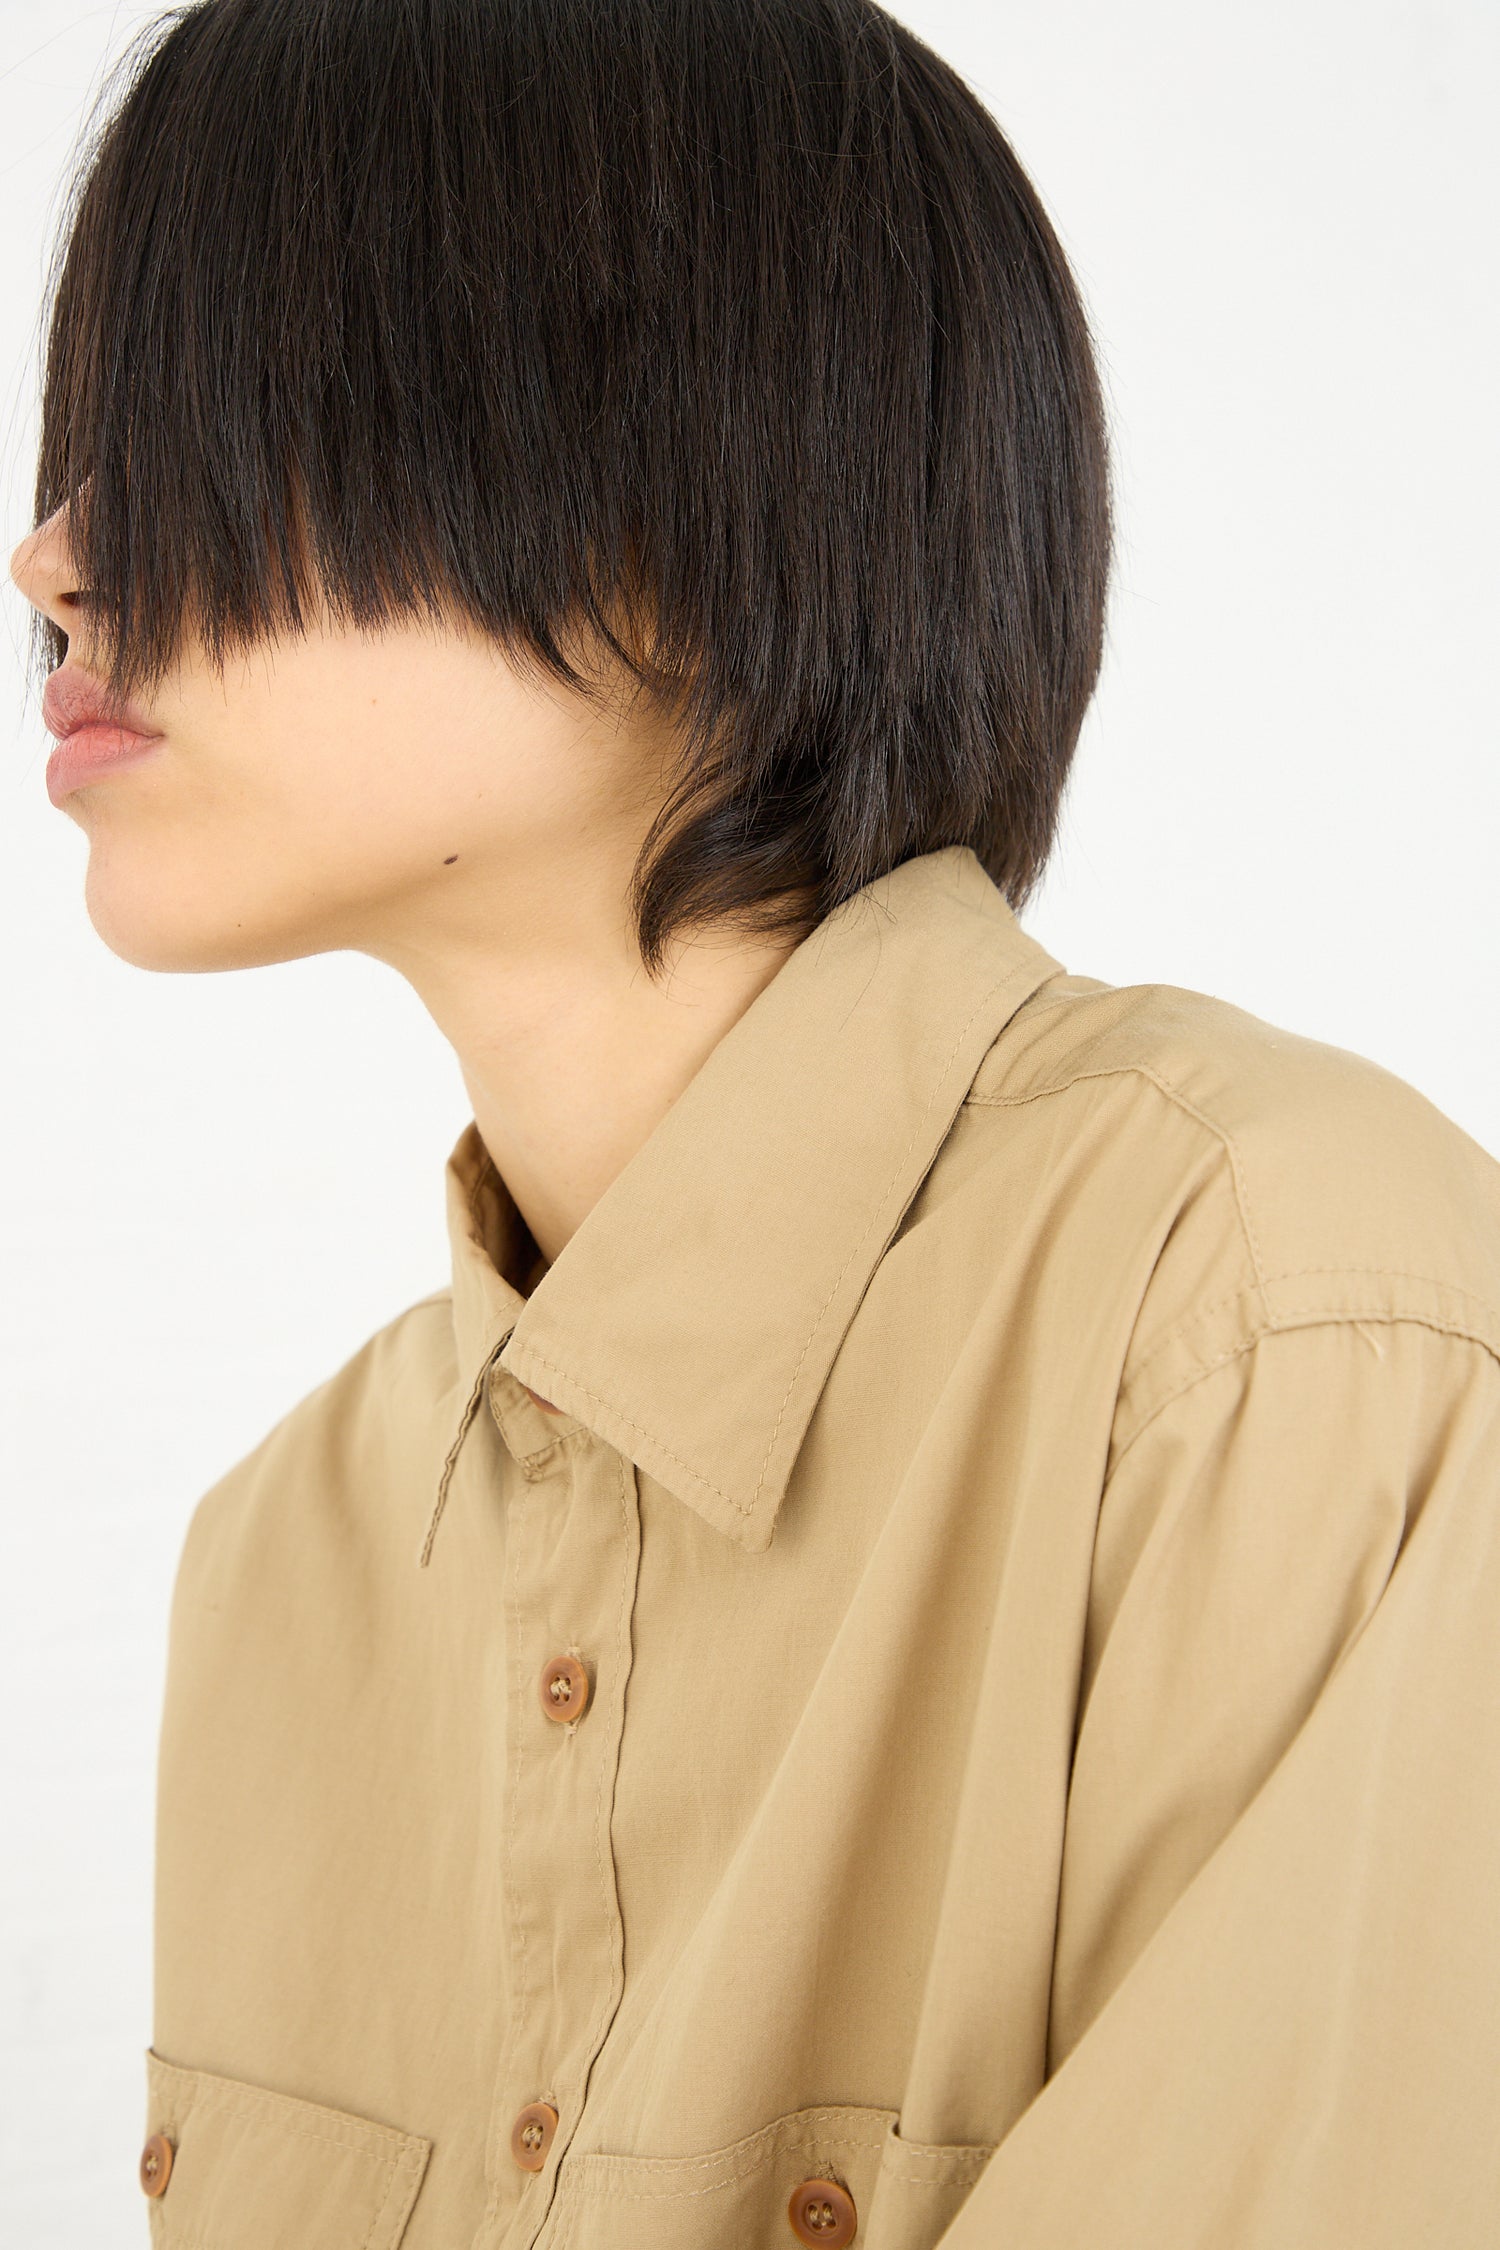 Profile of a person with a bob haircut wearing an As Ever 101 Shirt in 40's Khaki button-down collared shirt.